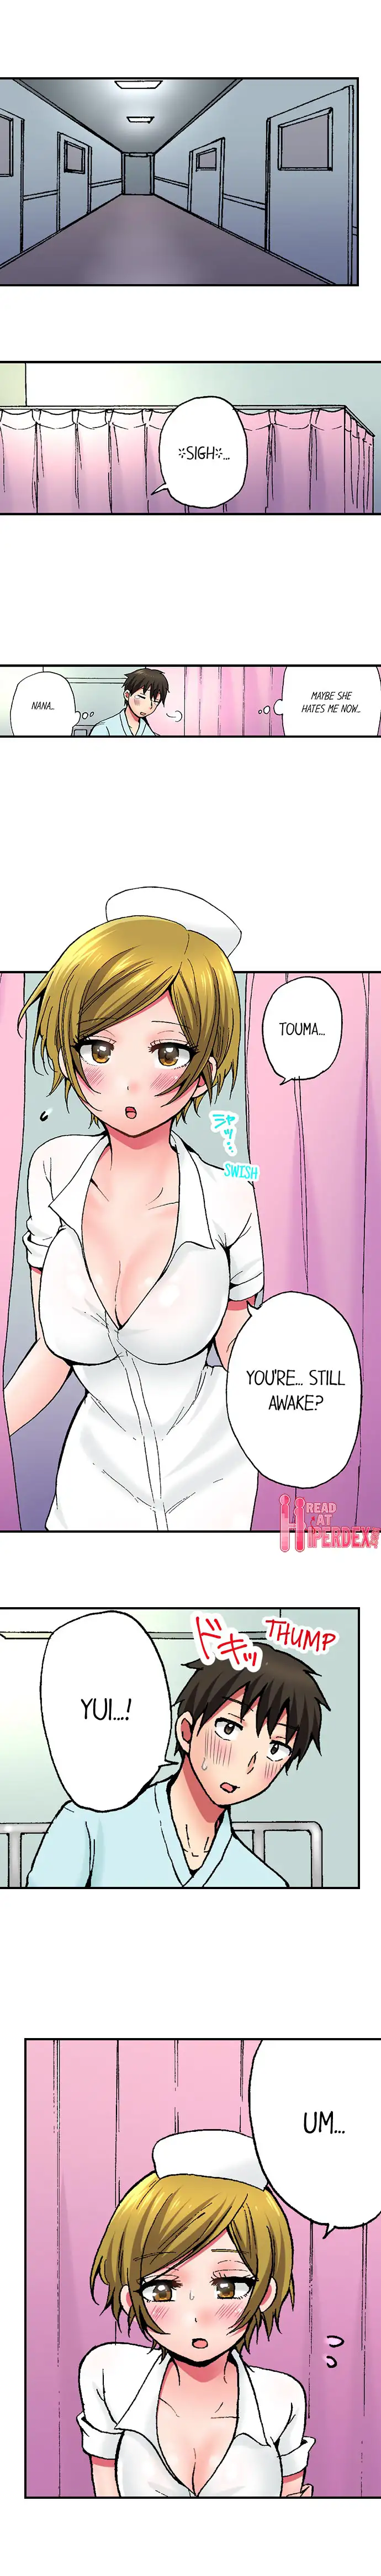 Pranking the Working Nurse Chapter 5 - Page 2